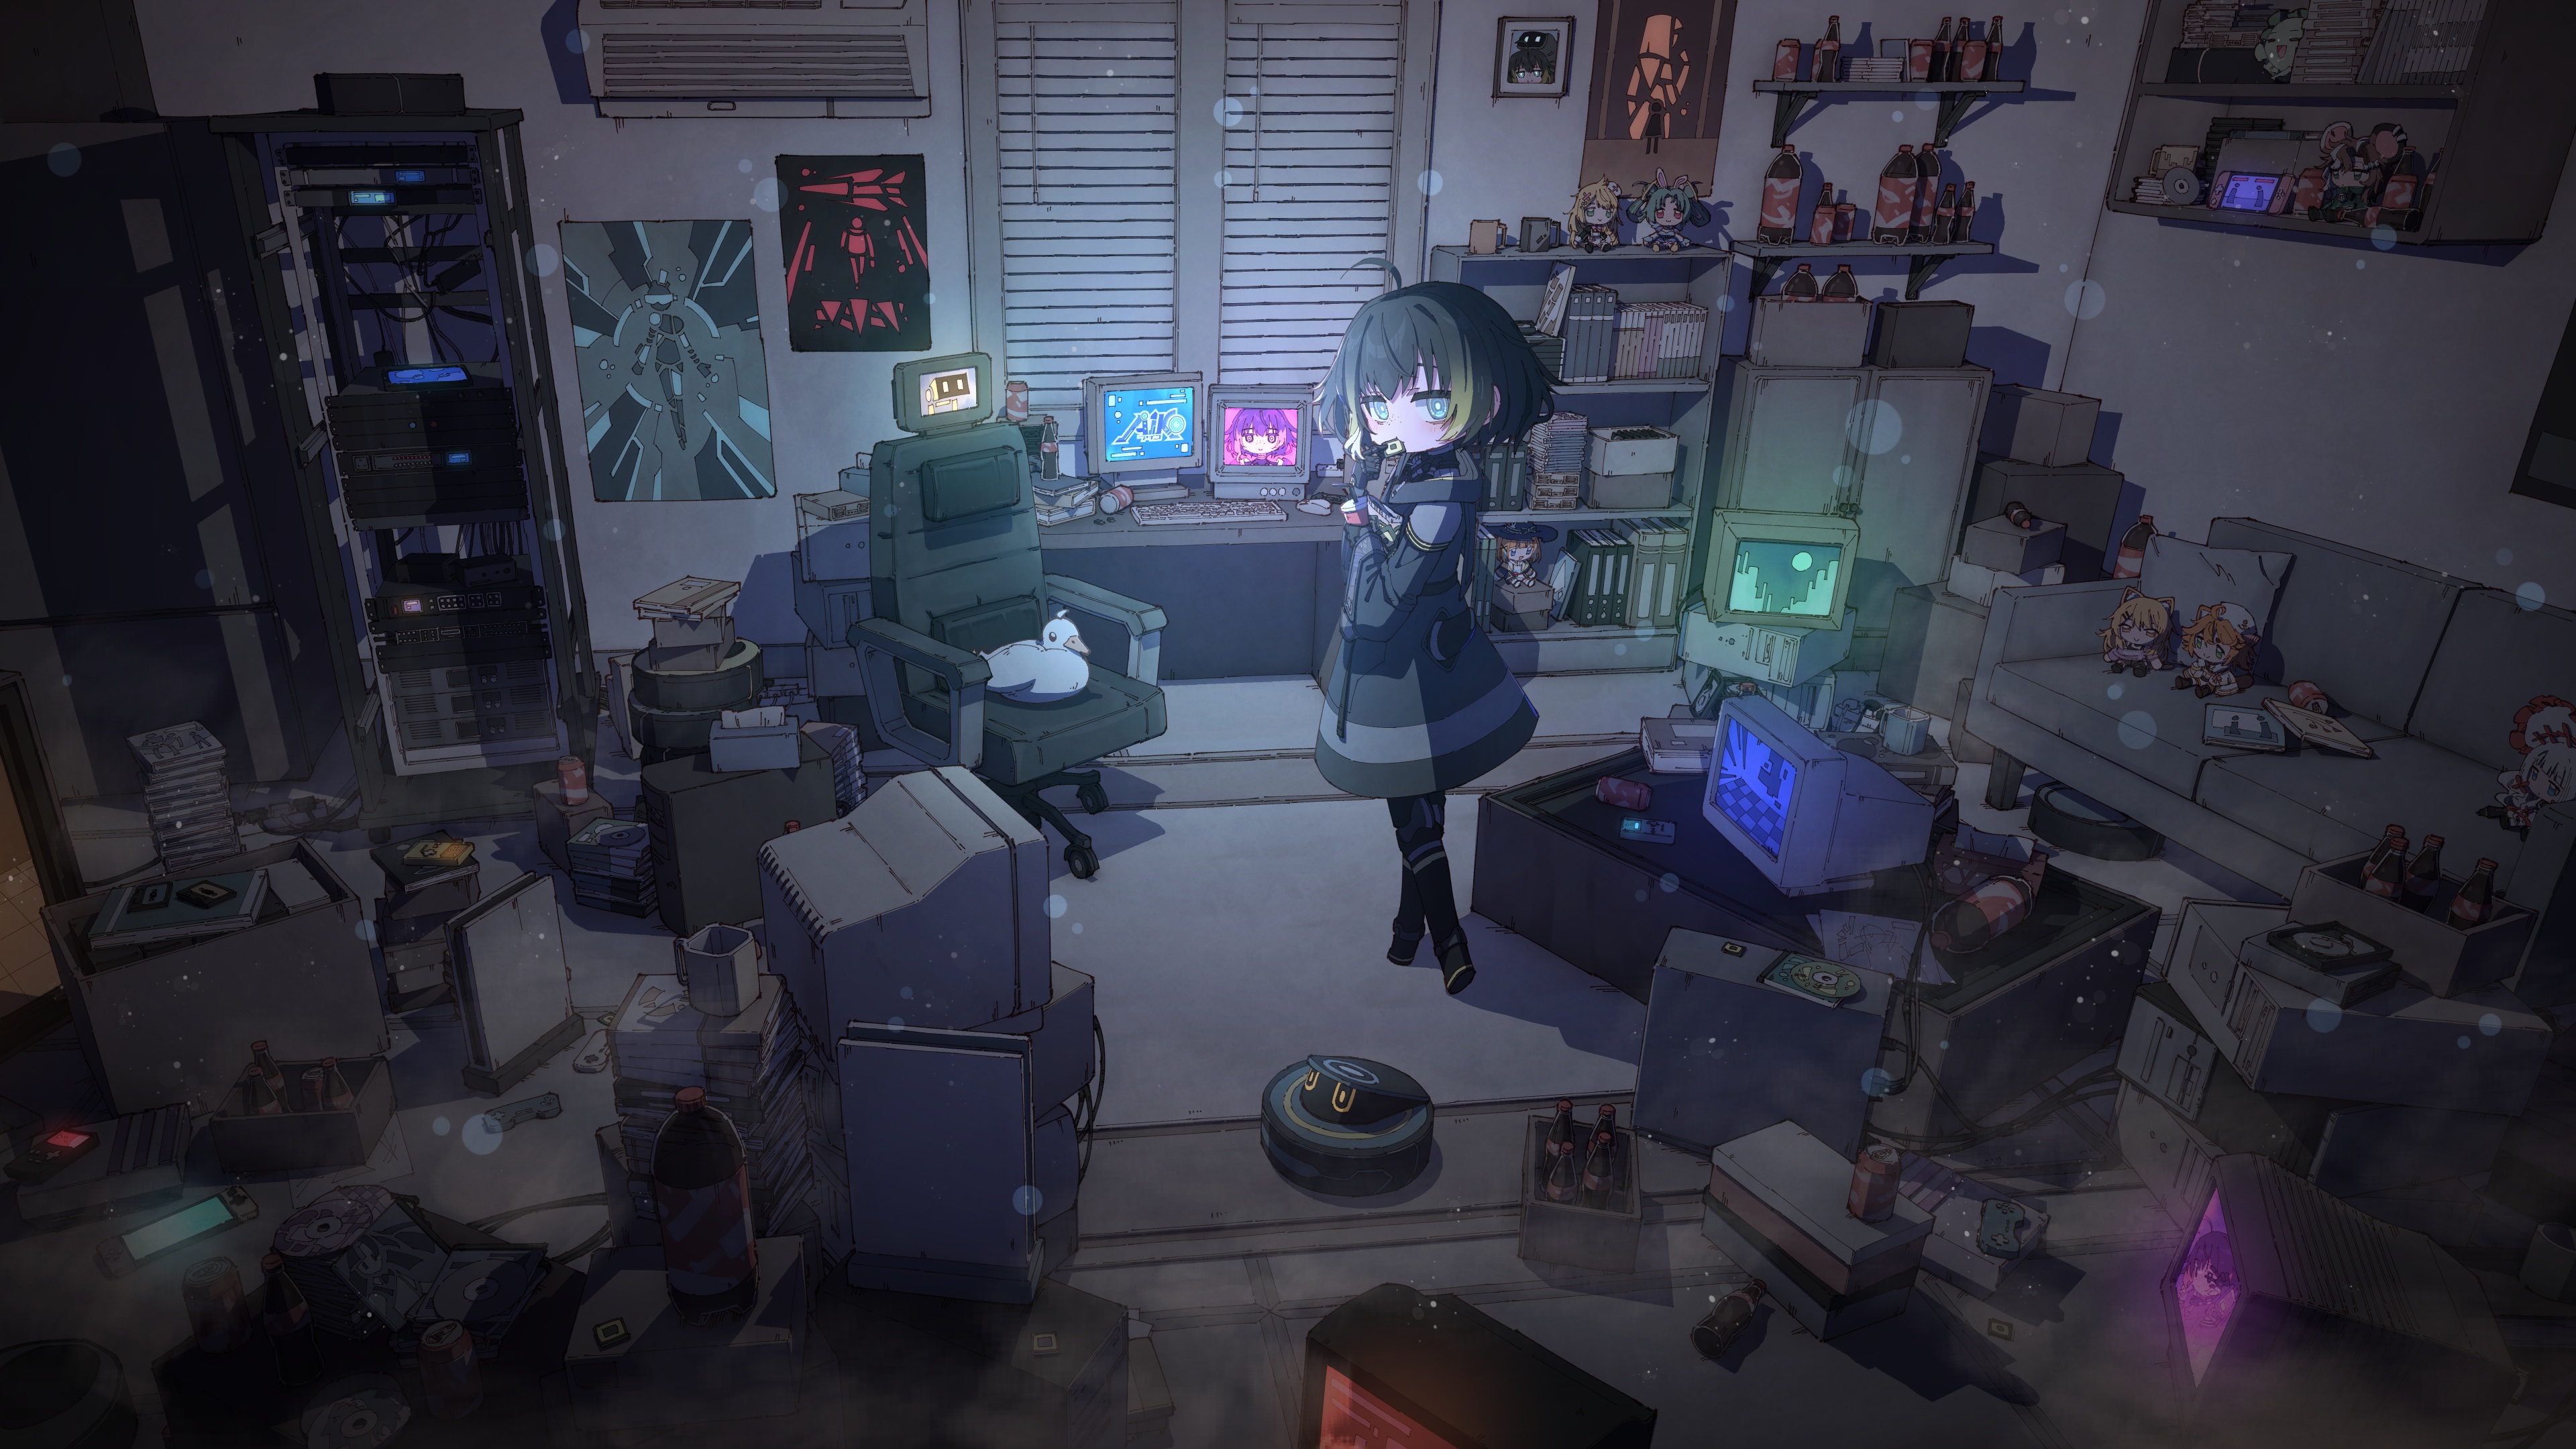 Anime 3840x2160 looking at viewer short hair indoors women indoors anime girls wide sleeves standing keyboards messy controllers blinds Nintendo Switch cassette air conditioning swivel chair drinking straw glass bottle plastic soda can drink Virtual Youtuber coats computer chair books birds discs wires technology server